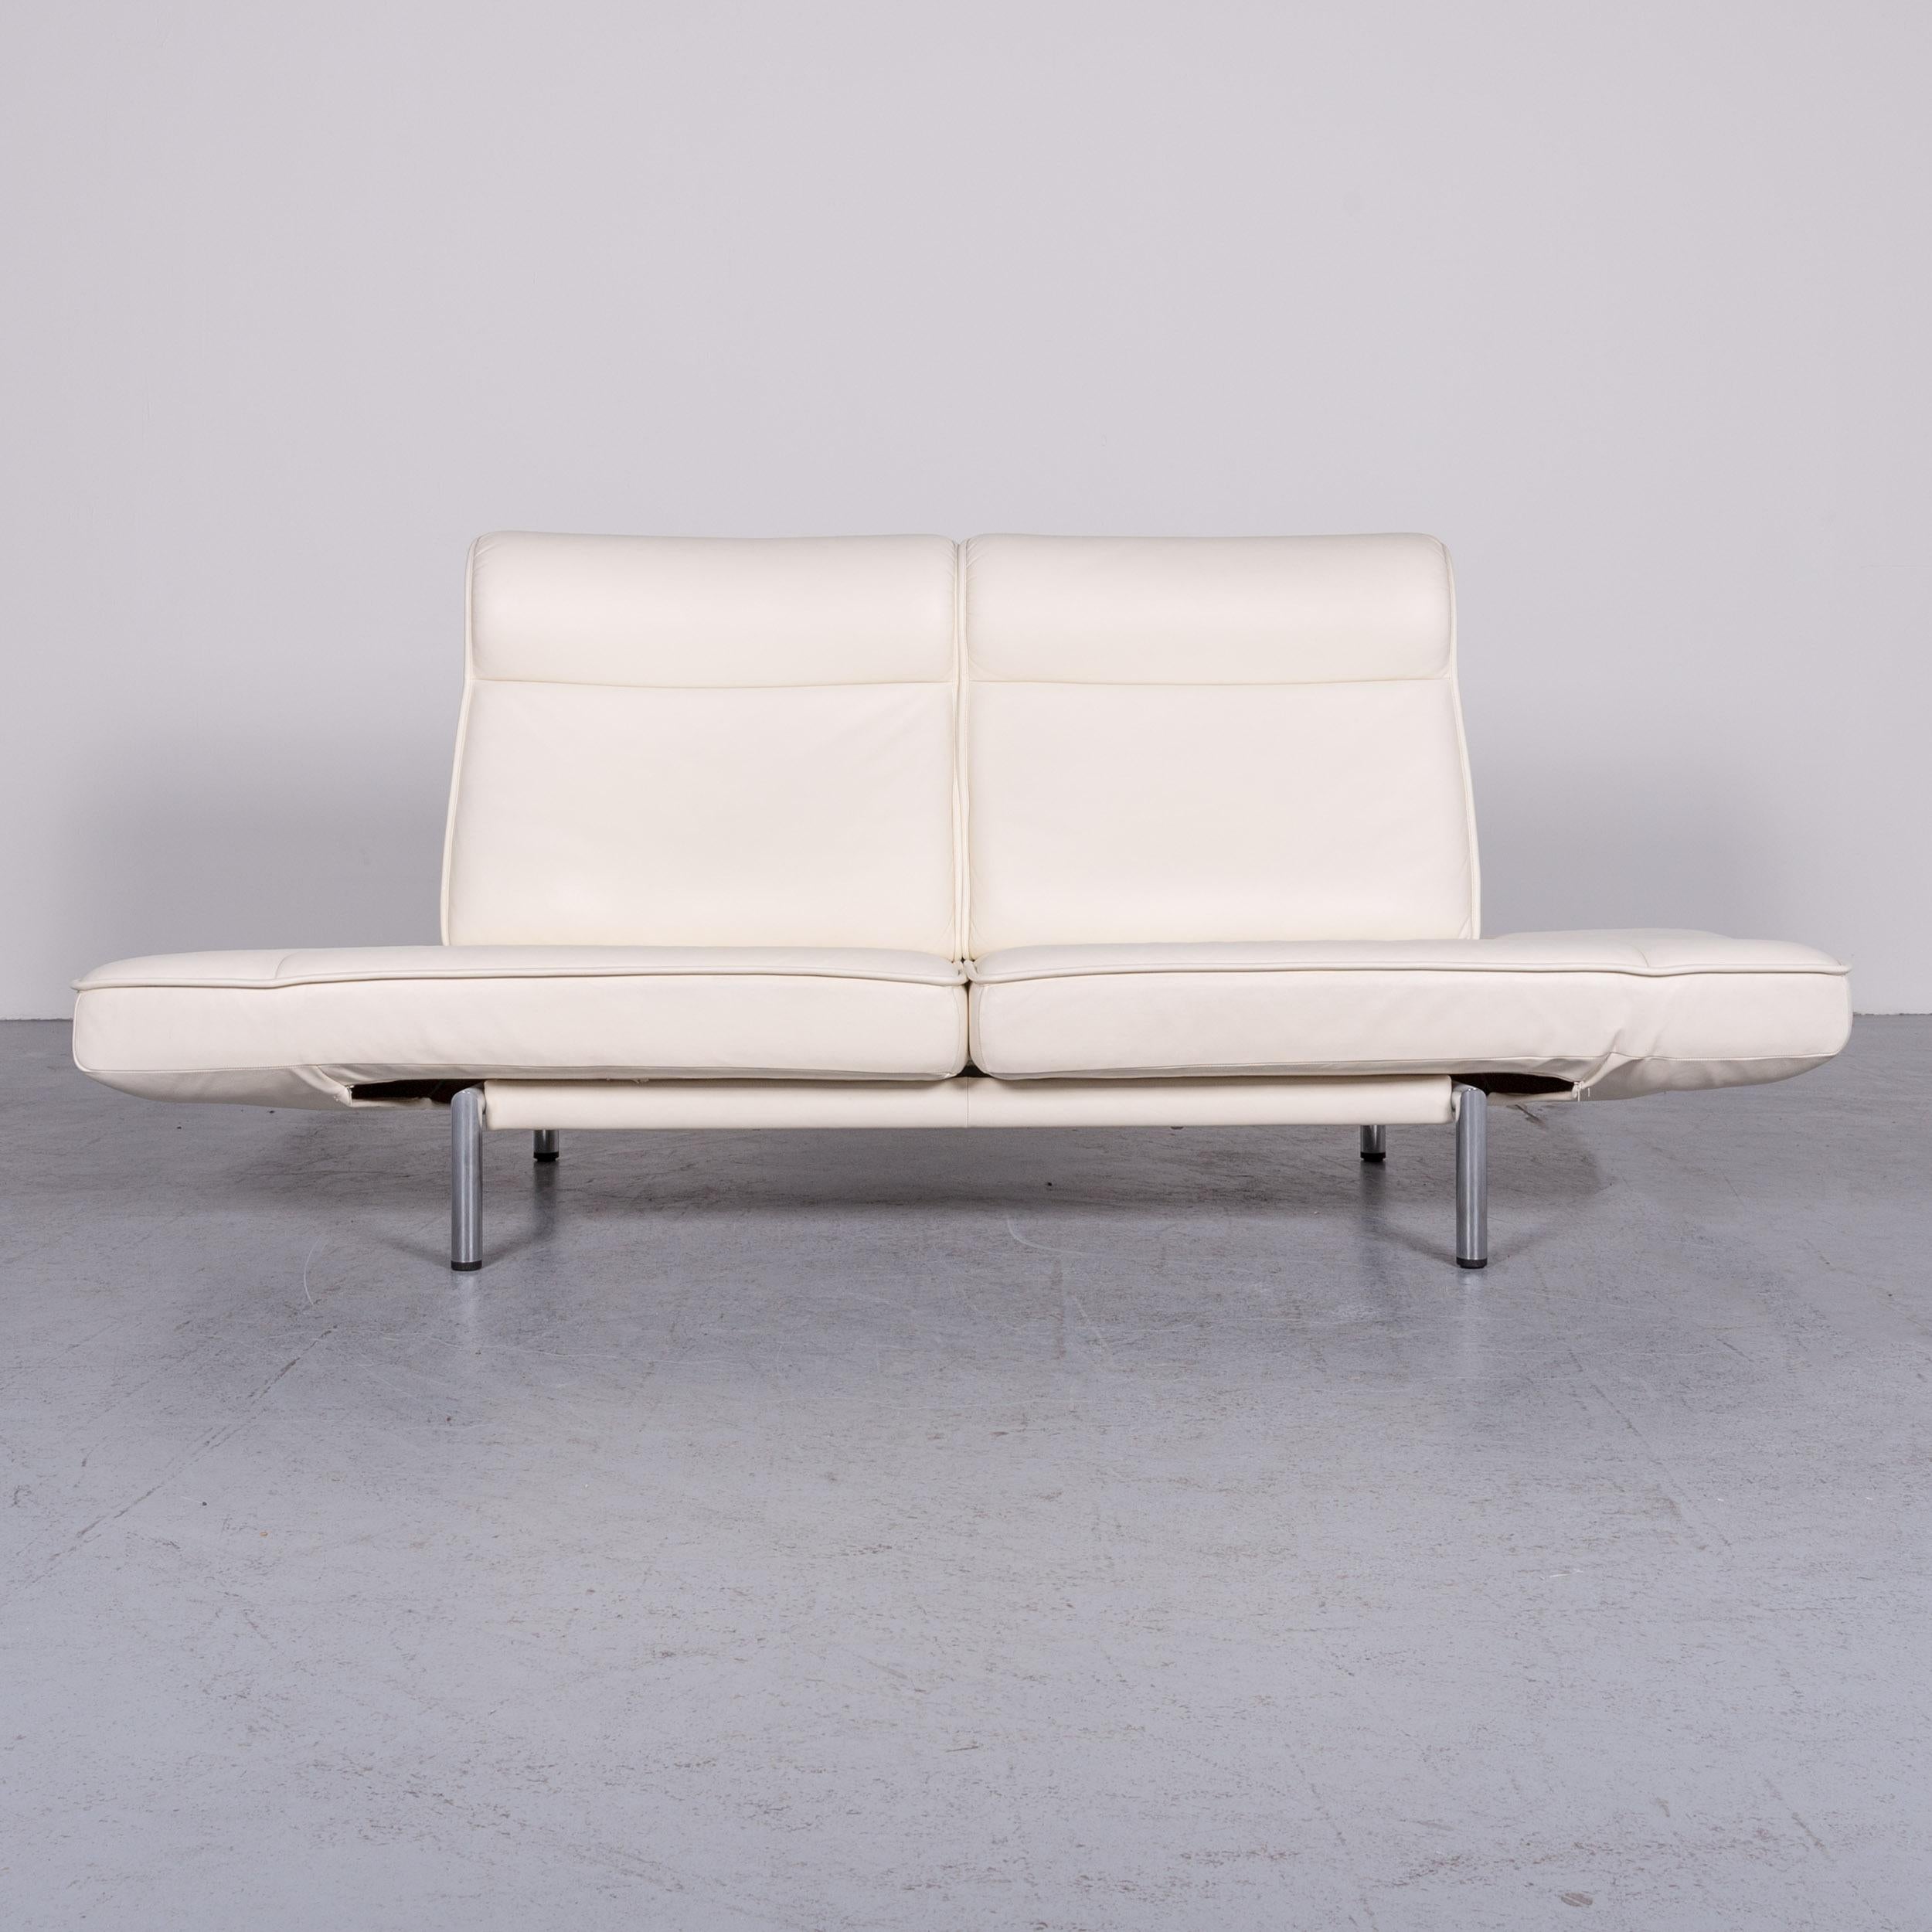 De Sede DS 450 sofa crème beige leather three-seat couch made in Switzerland.